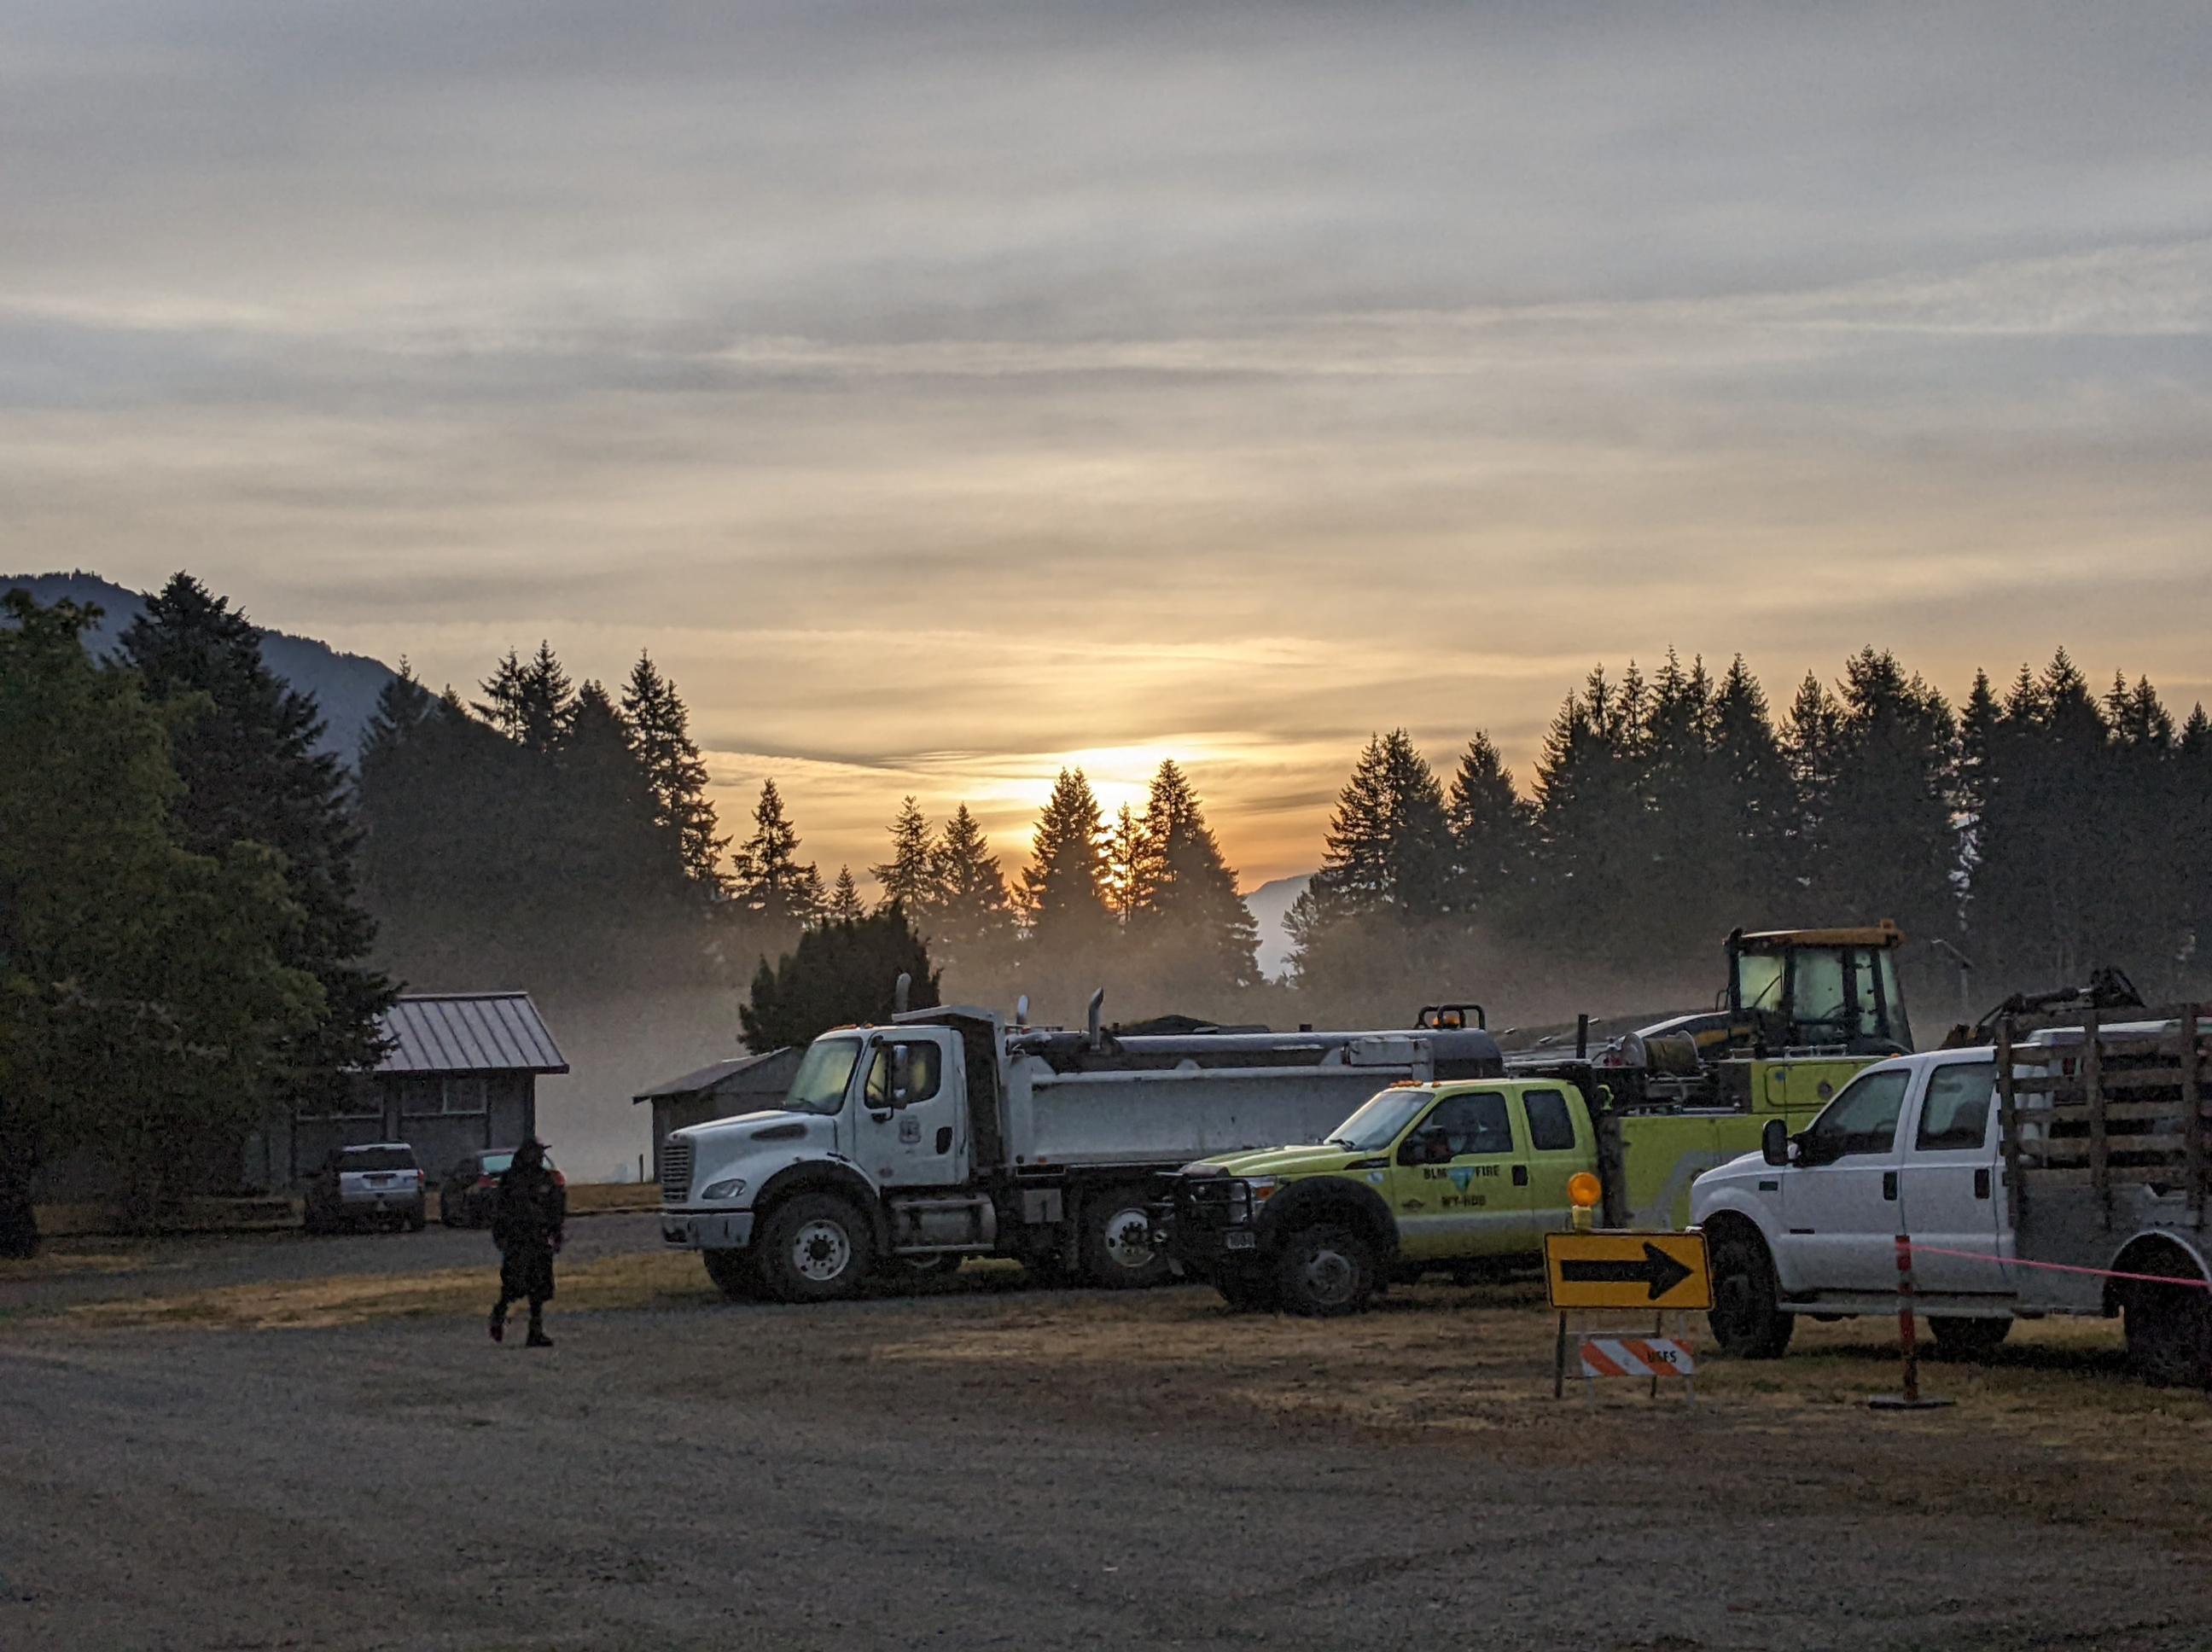 The Sun rises behind a USFS dump truck and a BLM Engine. Their is a firefighter walking towards the trucks and the sun. Behind the trucks are some firs that the sun is rising over,.